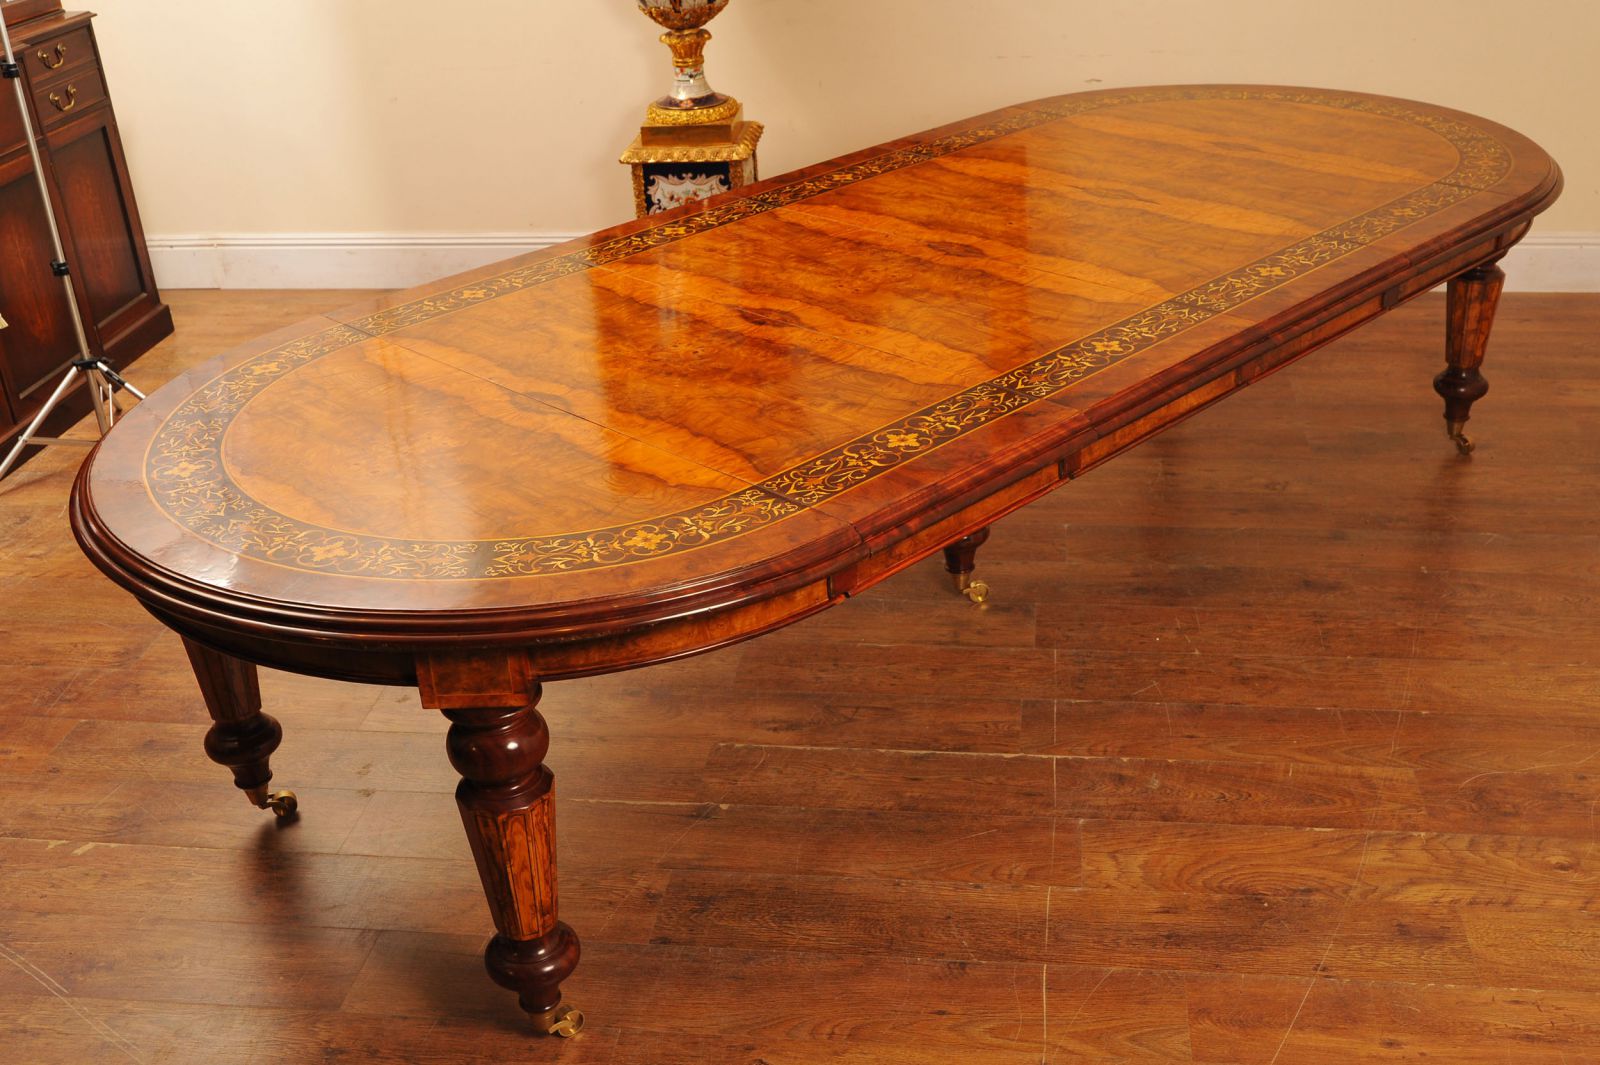 This is a walnut Victorian dining table with marquetry inlay work